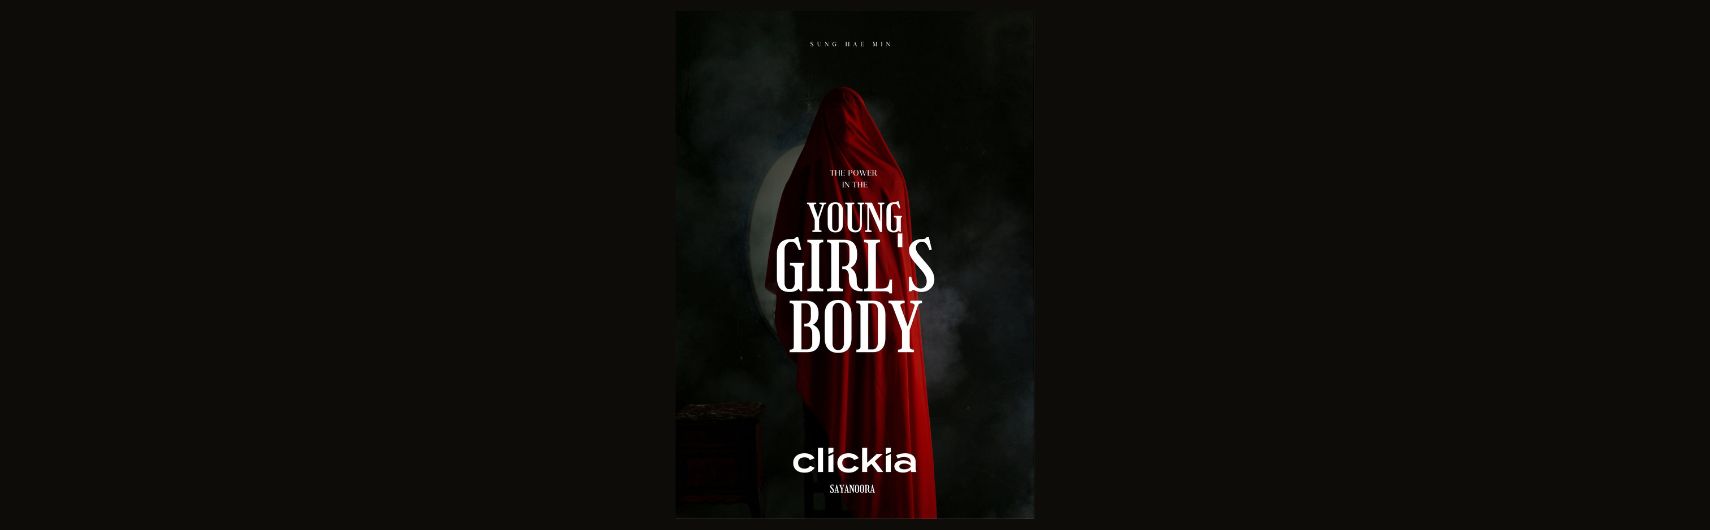 Clickia - The Power In The Young Girl's Body